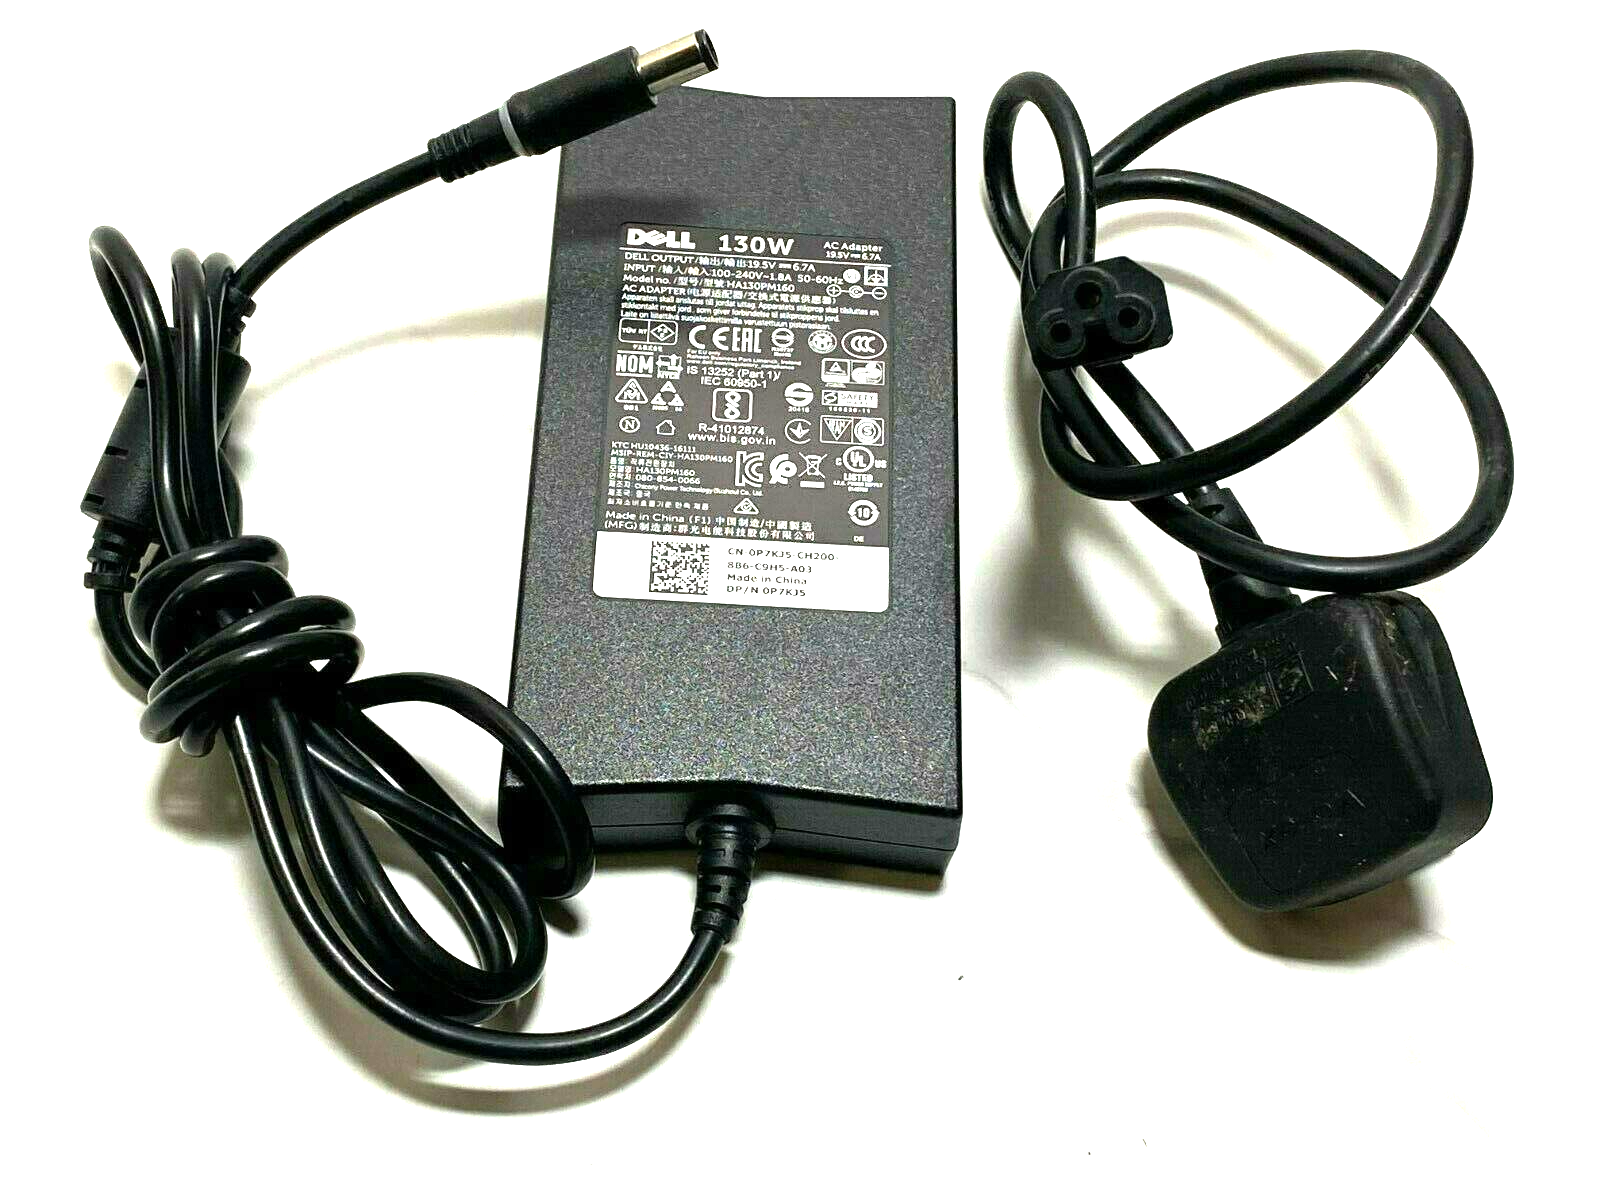 GENUINE DELL LAPTOP CHARGER PIN SIZE    130W WITH POWER  LEAD | eBay